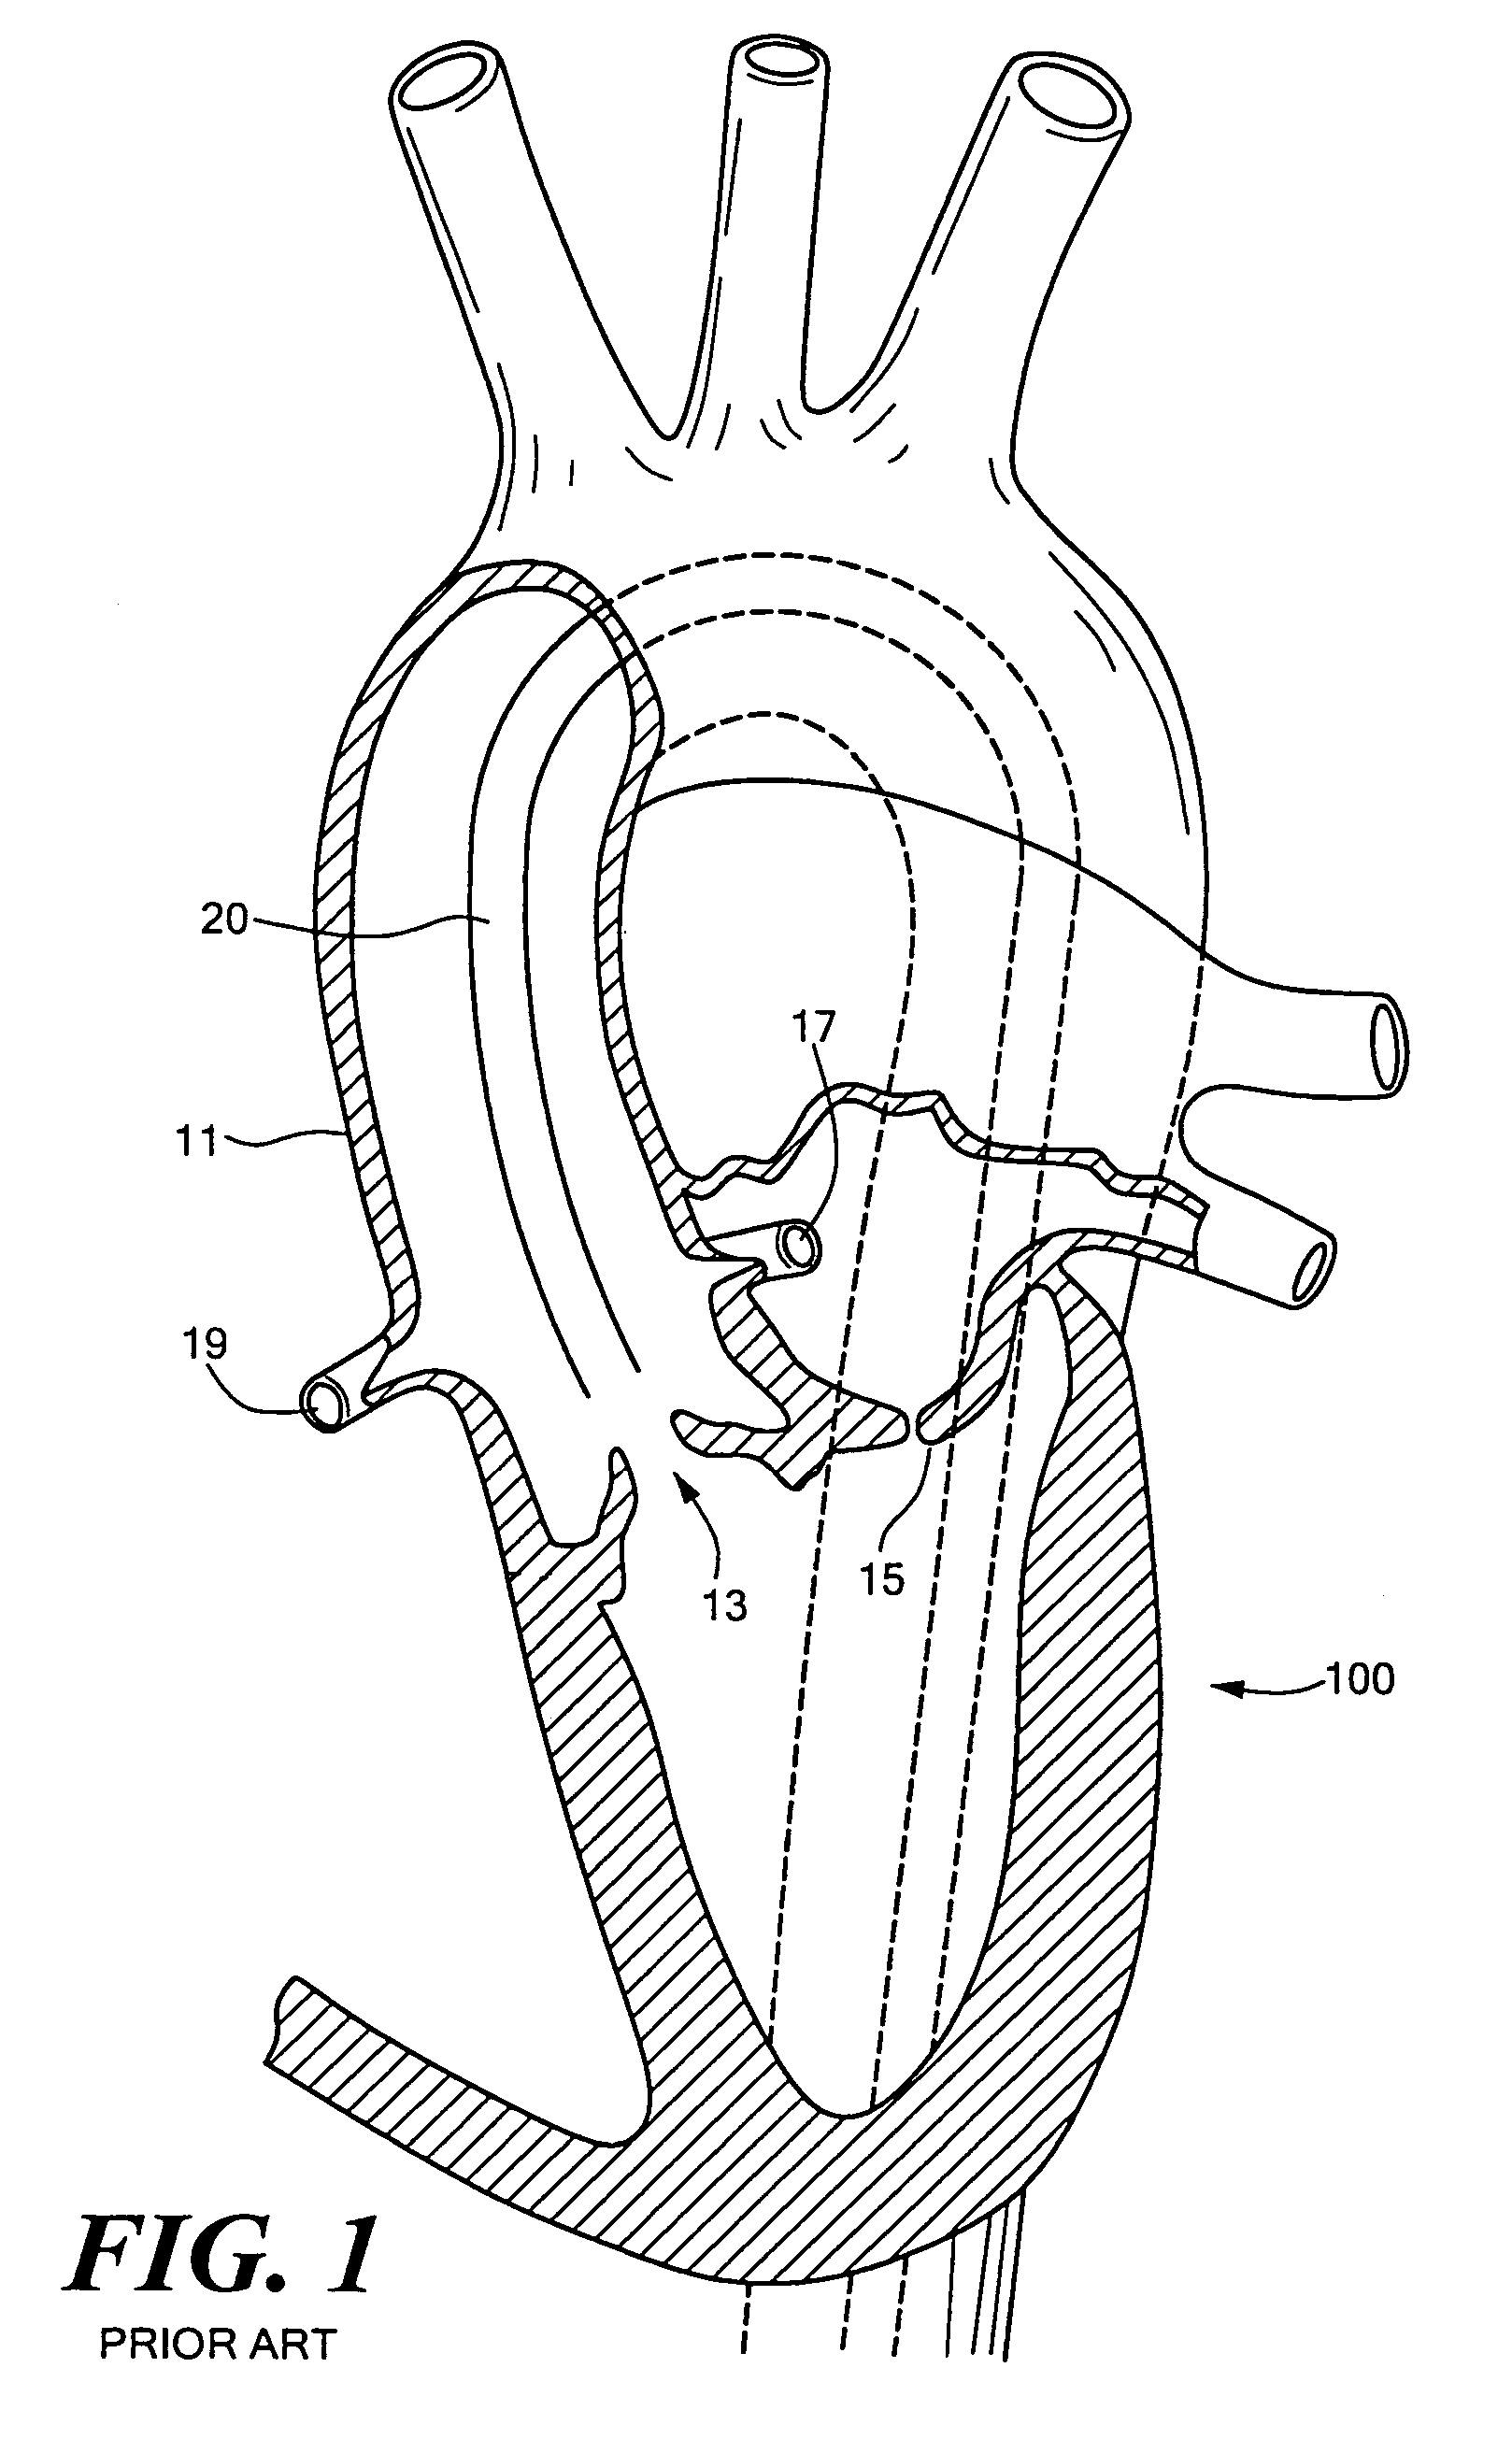 Replacement heart valve sizing device